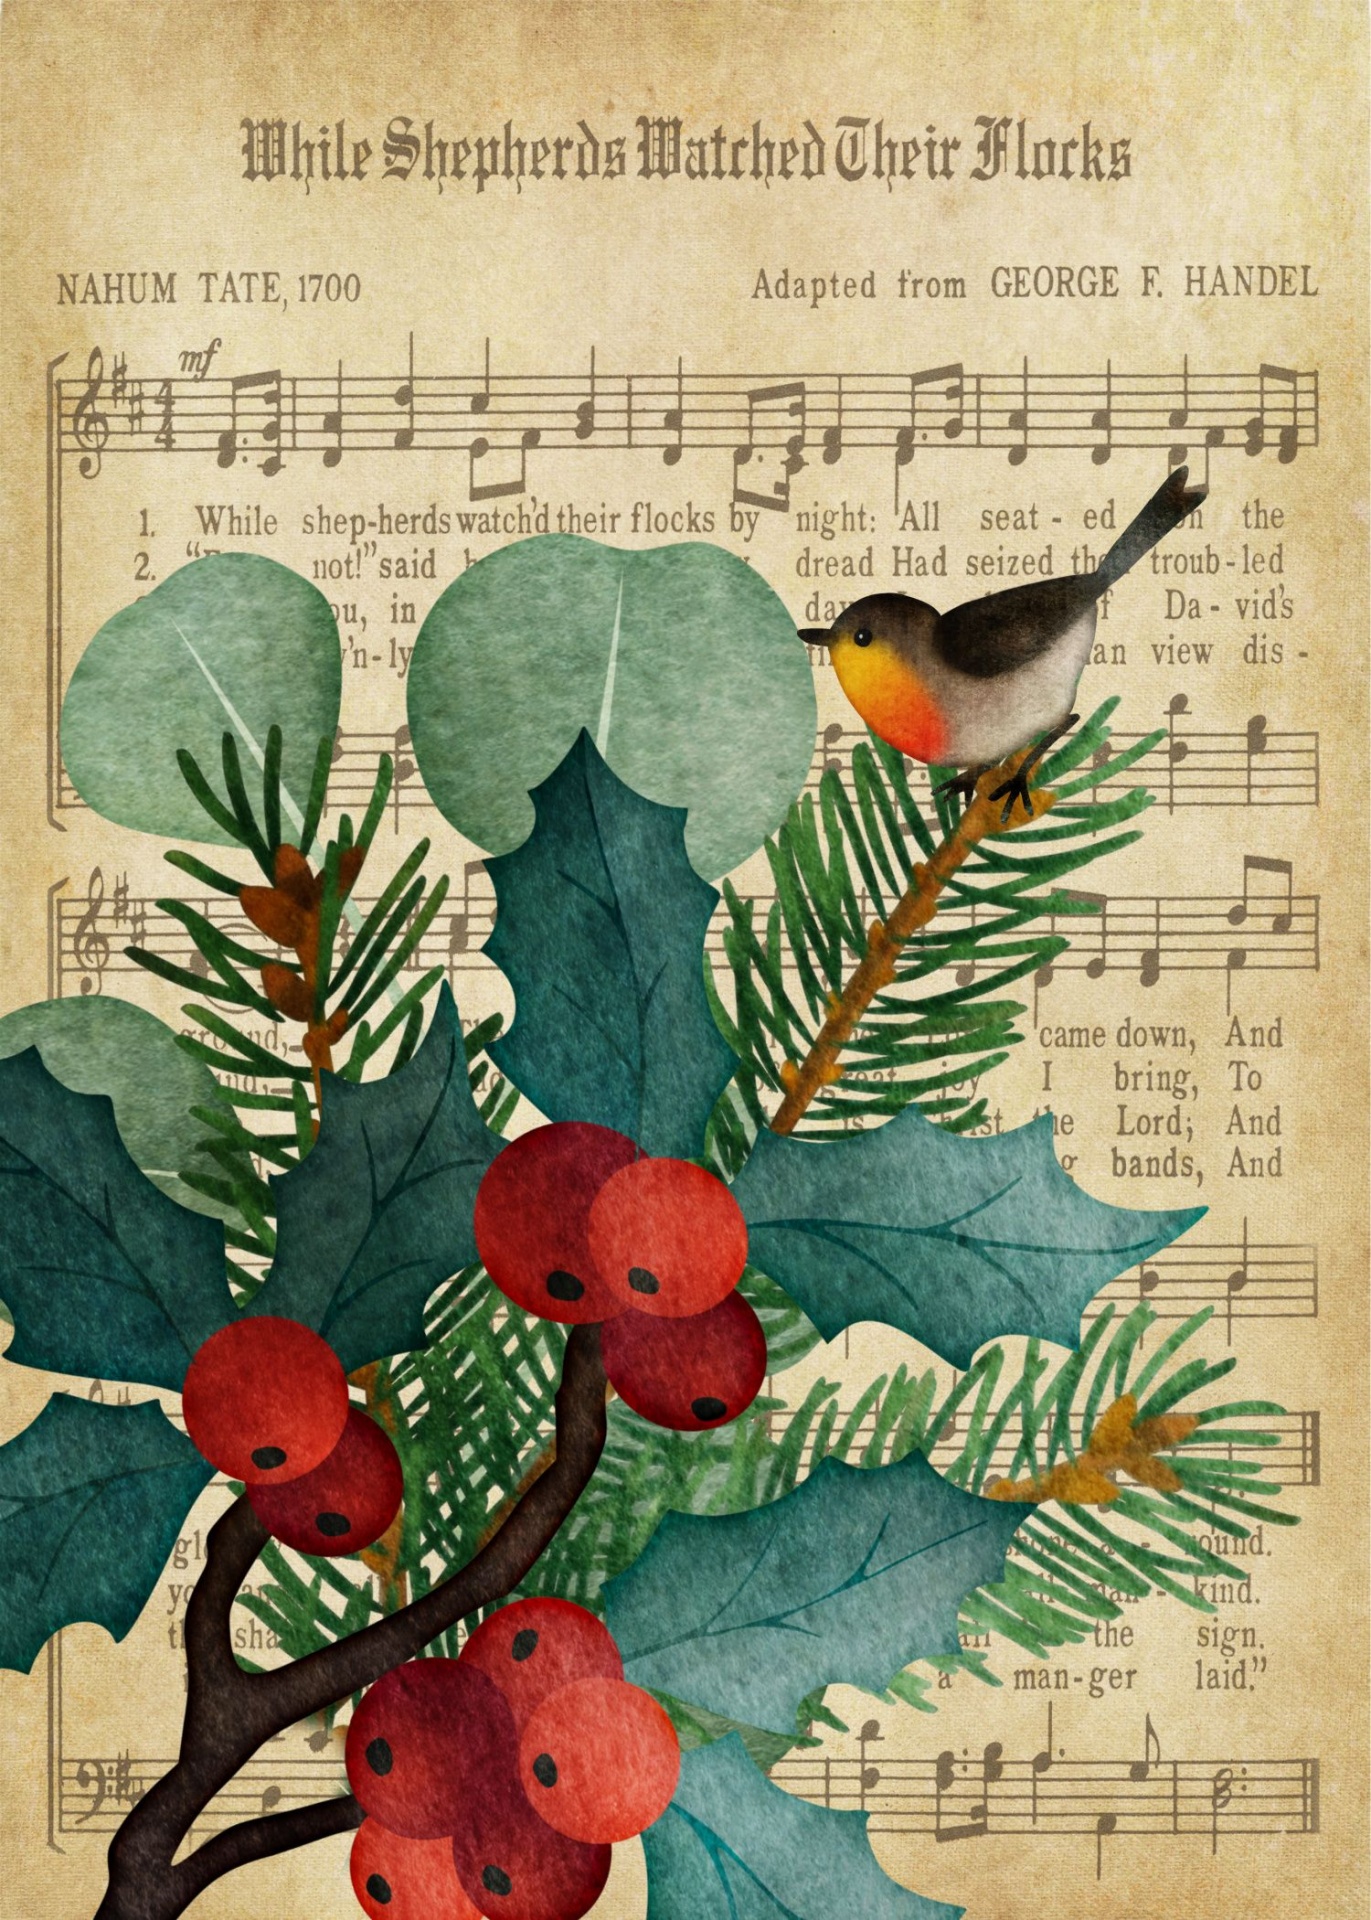 free download christmas cards with music